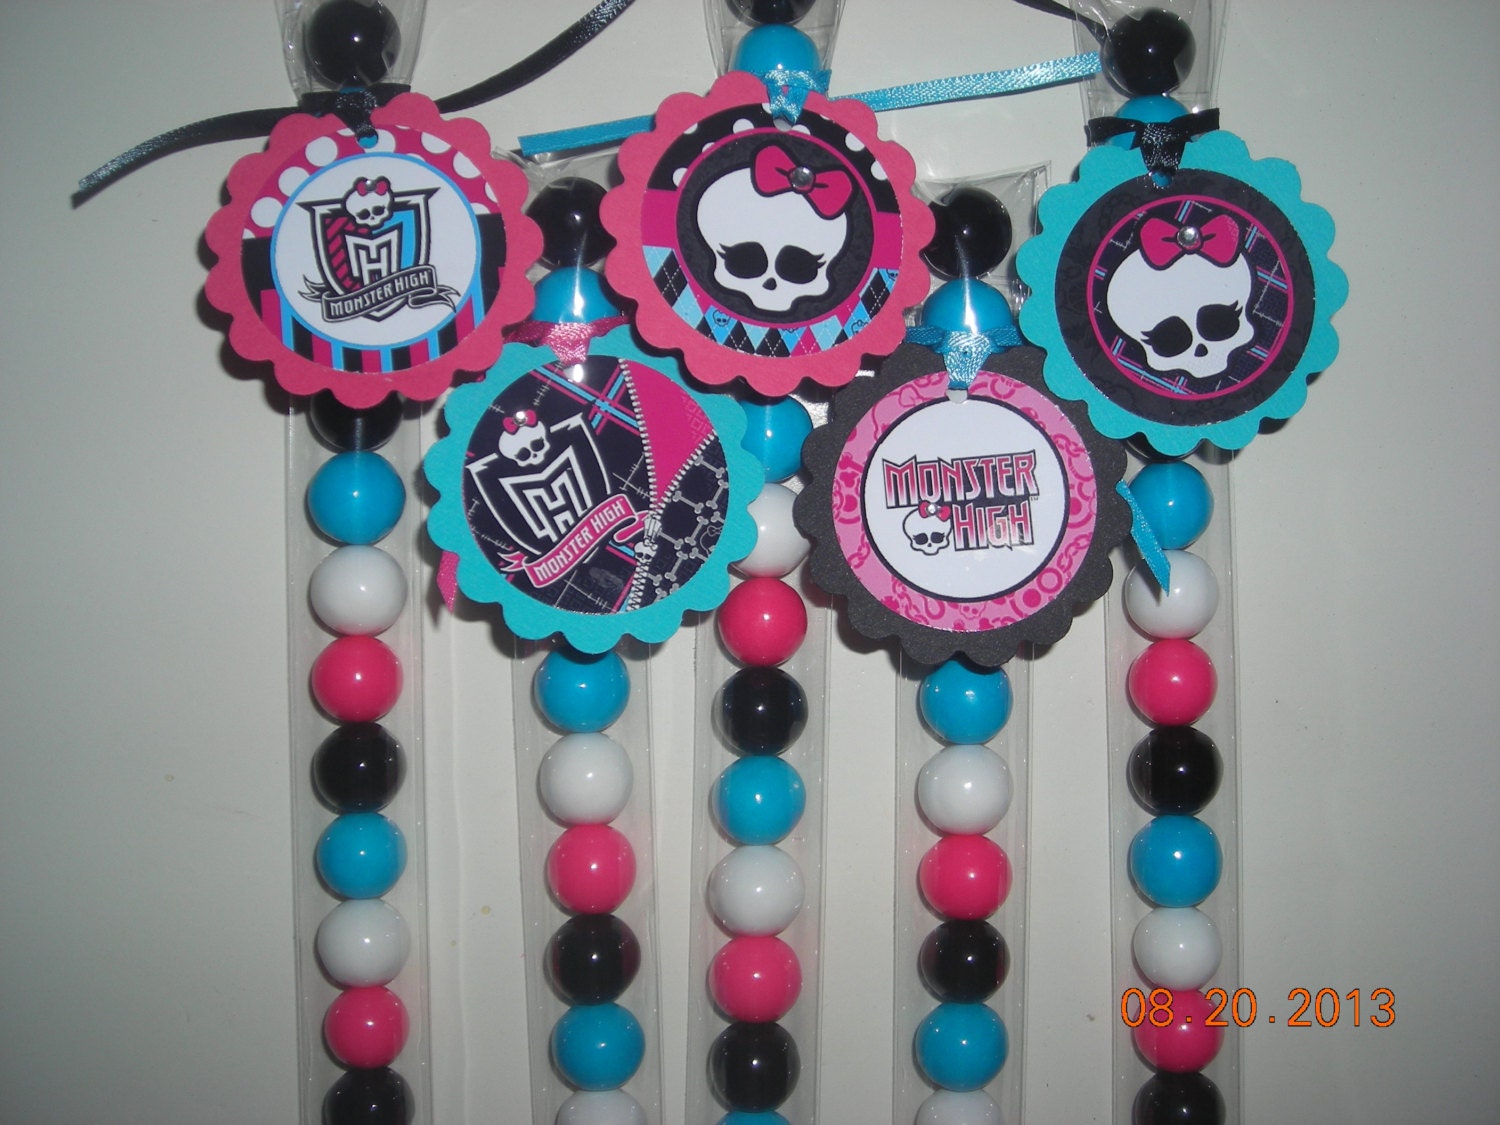 12 Monster High Inspired Candy Treat Bags Favors Tags Stix Tubes Toppers Birthday Goodie Bags Party Girls Skull Logo Pink Black Aqua